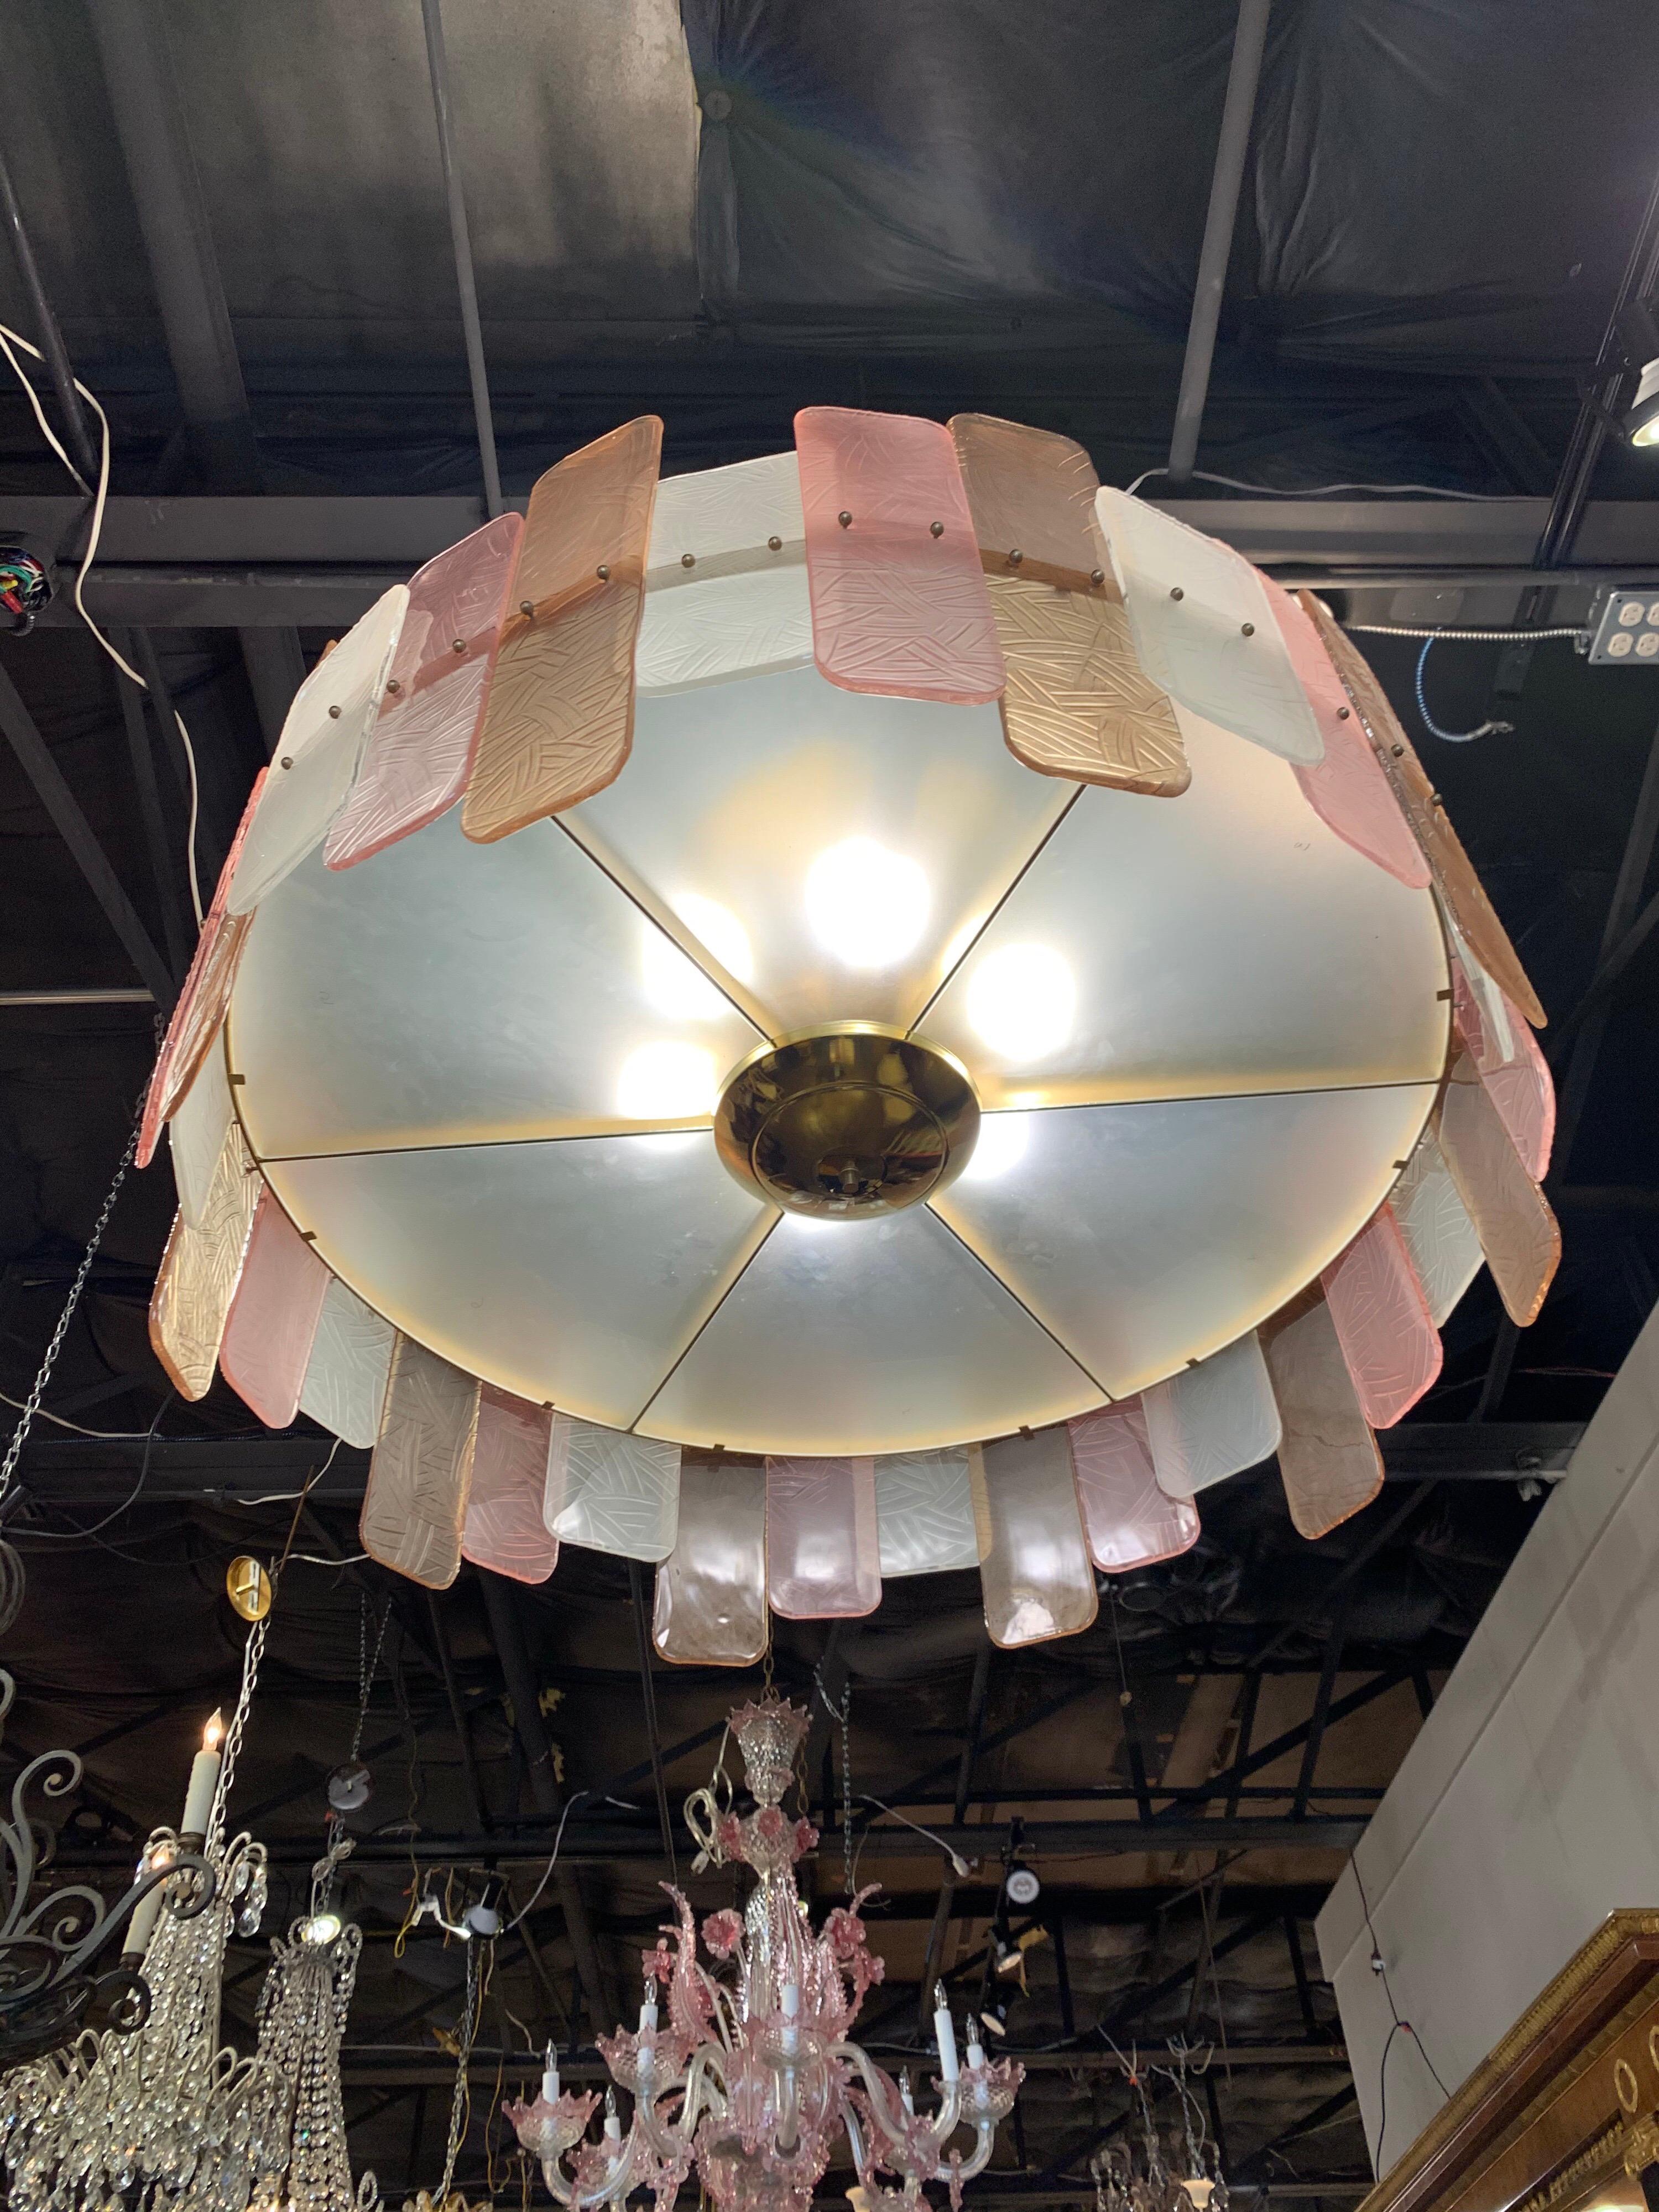 Stunning modern Murano glass multicolored round chandelier. Textural rectangles of glass in the colors of pink, beige and white. A very unique fixture that would make a beautiful decorative touch!